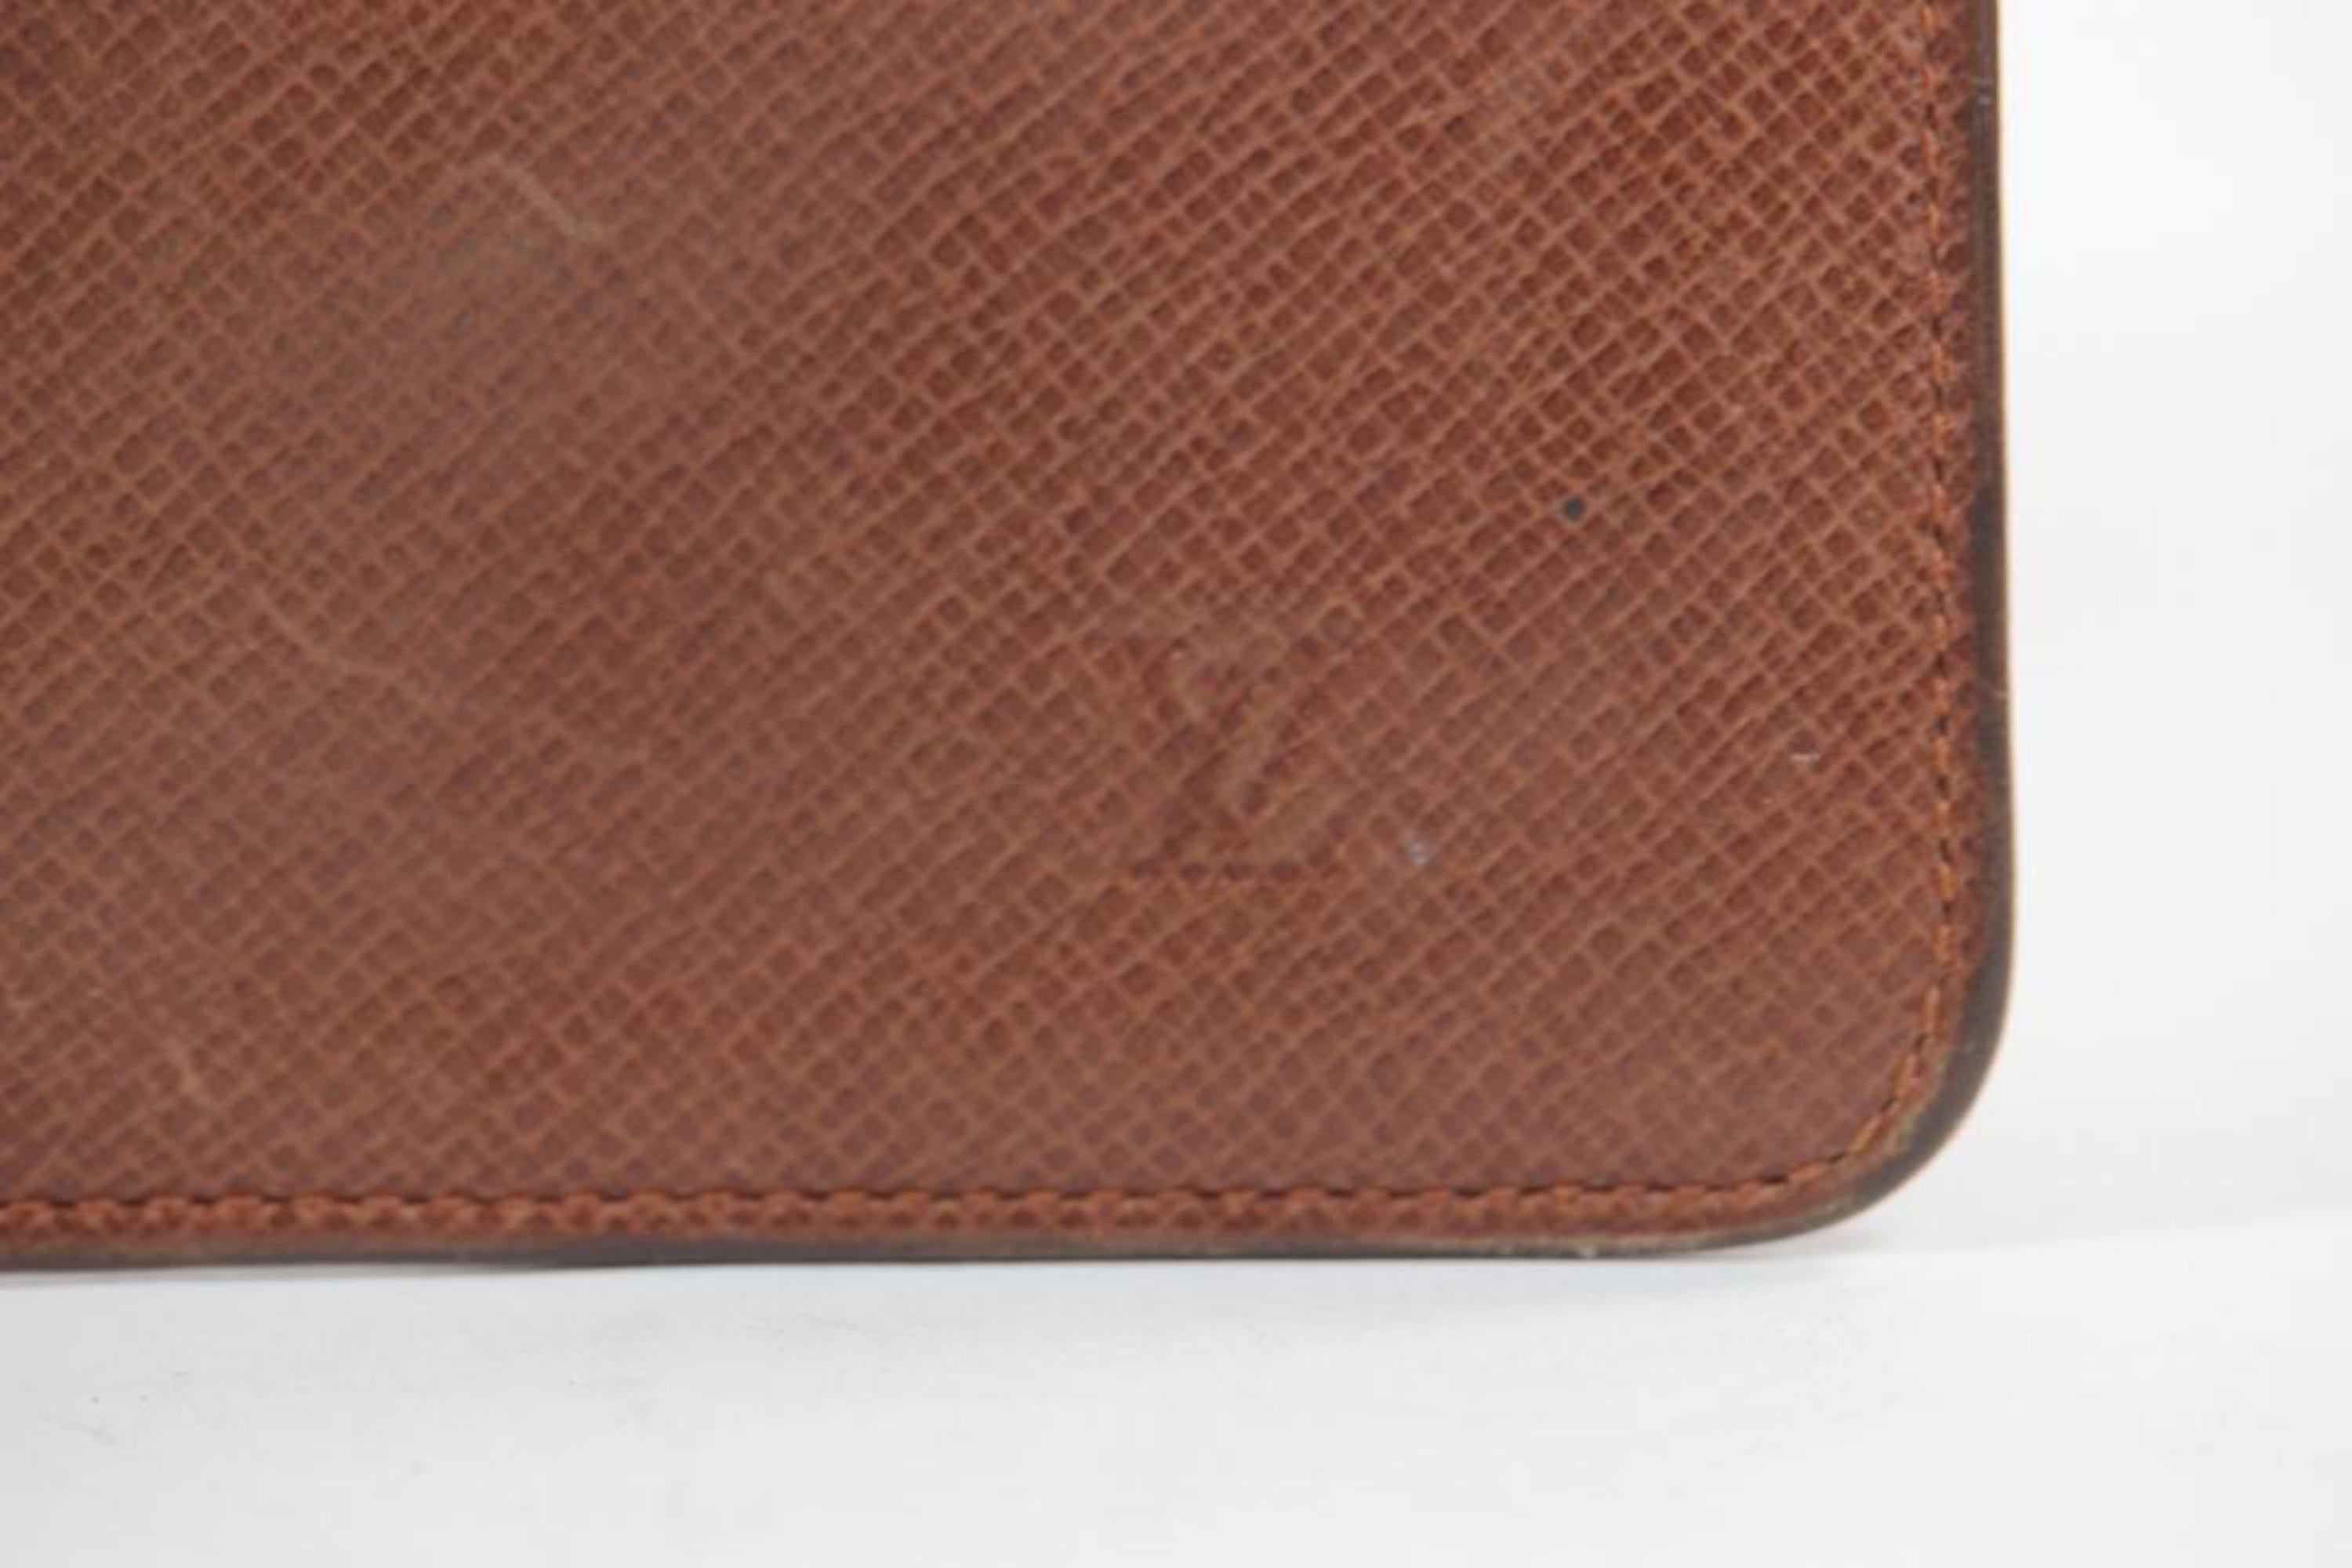 Louis Vuitton Brown Taiga Leather Key Pouch 13lv1103
Made In: Spain
Measurements: Length: 4.5 